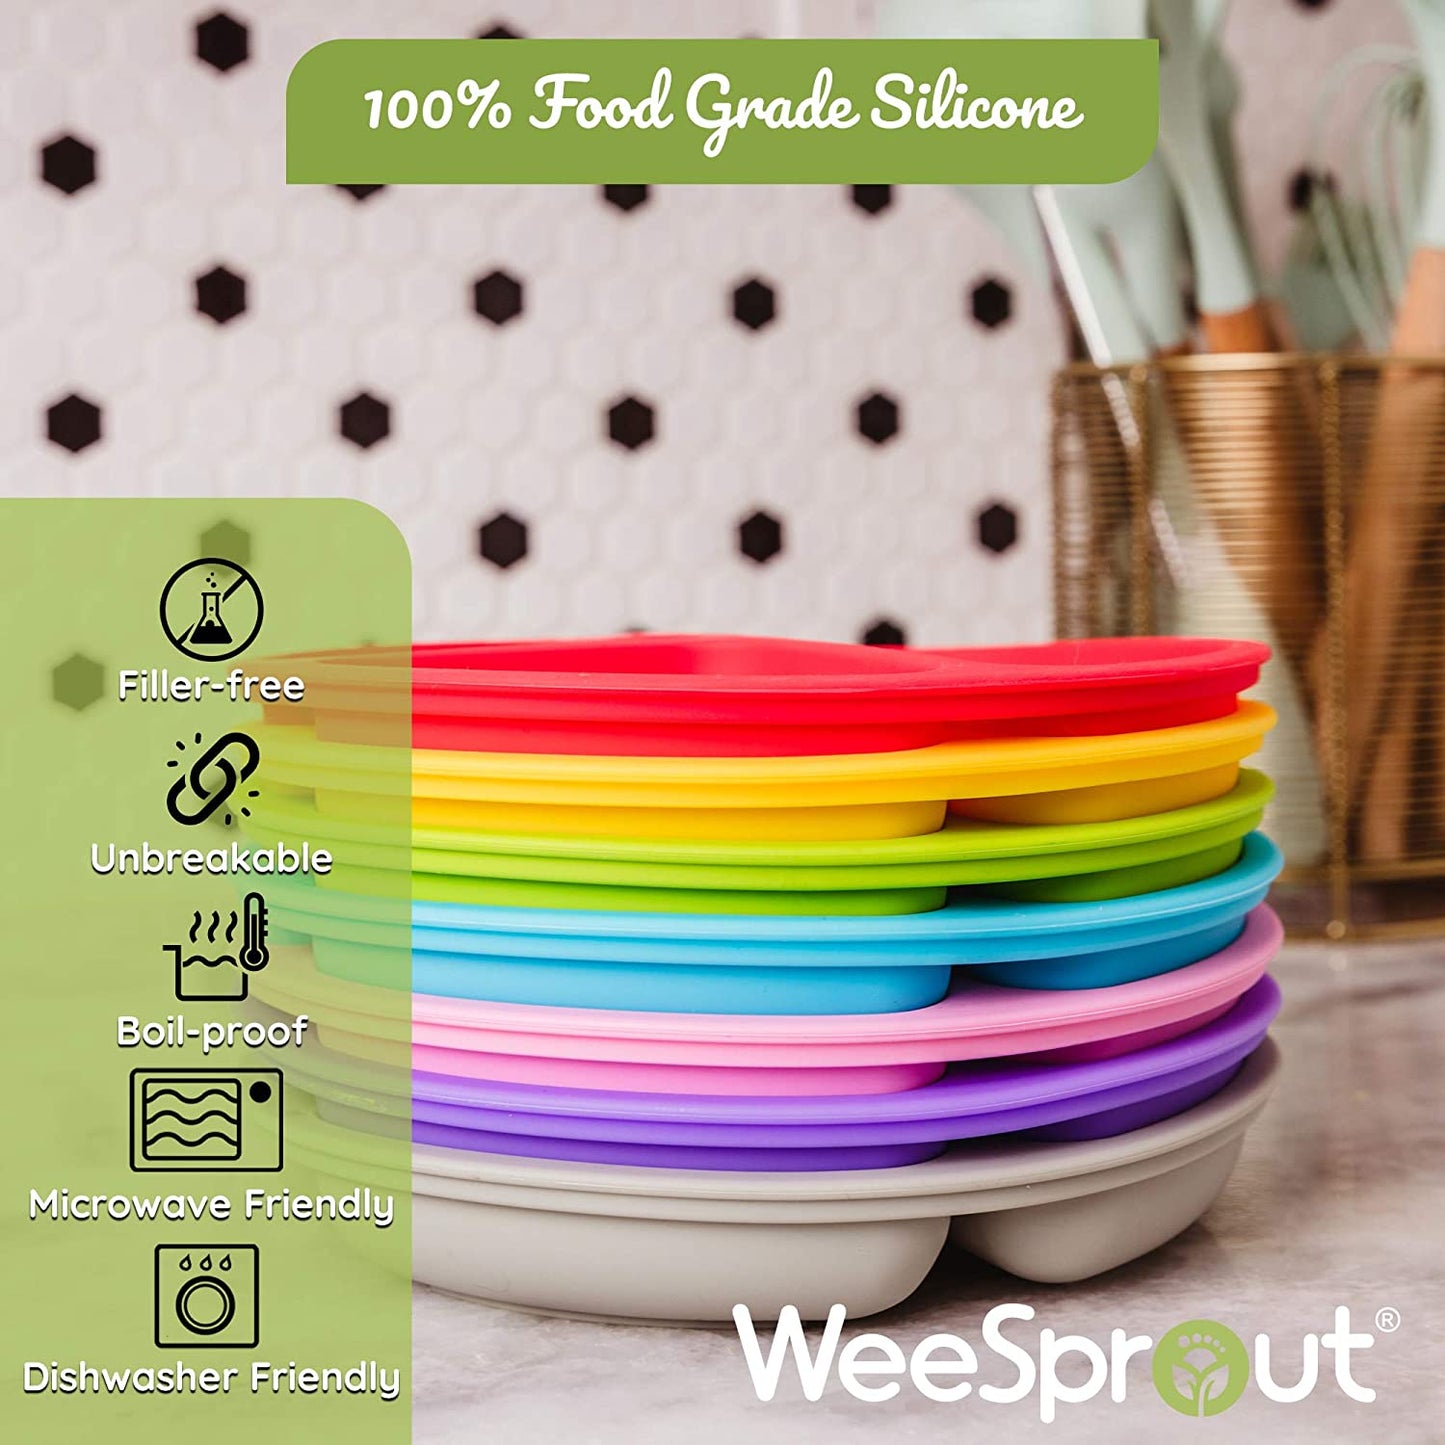 Suction Plates with Lids for Babies & Toddlers - 100% Silicone, Plates Stay Put with Suction Feature, Divided Design, Microwave & Dishwasher Friendly, 3 Pack